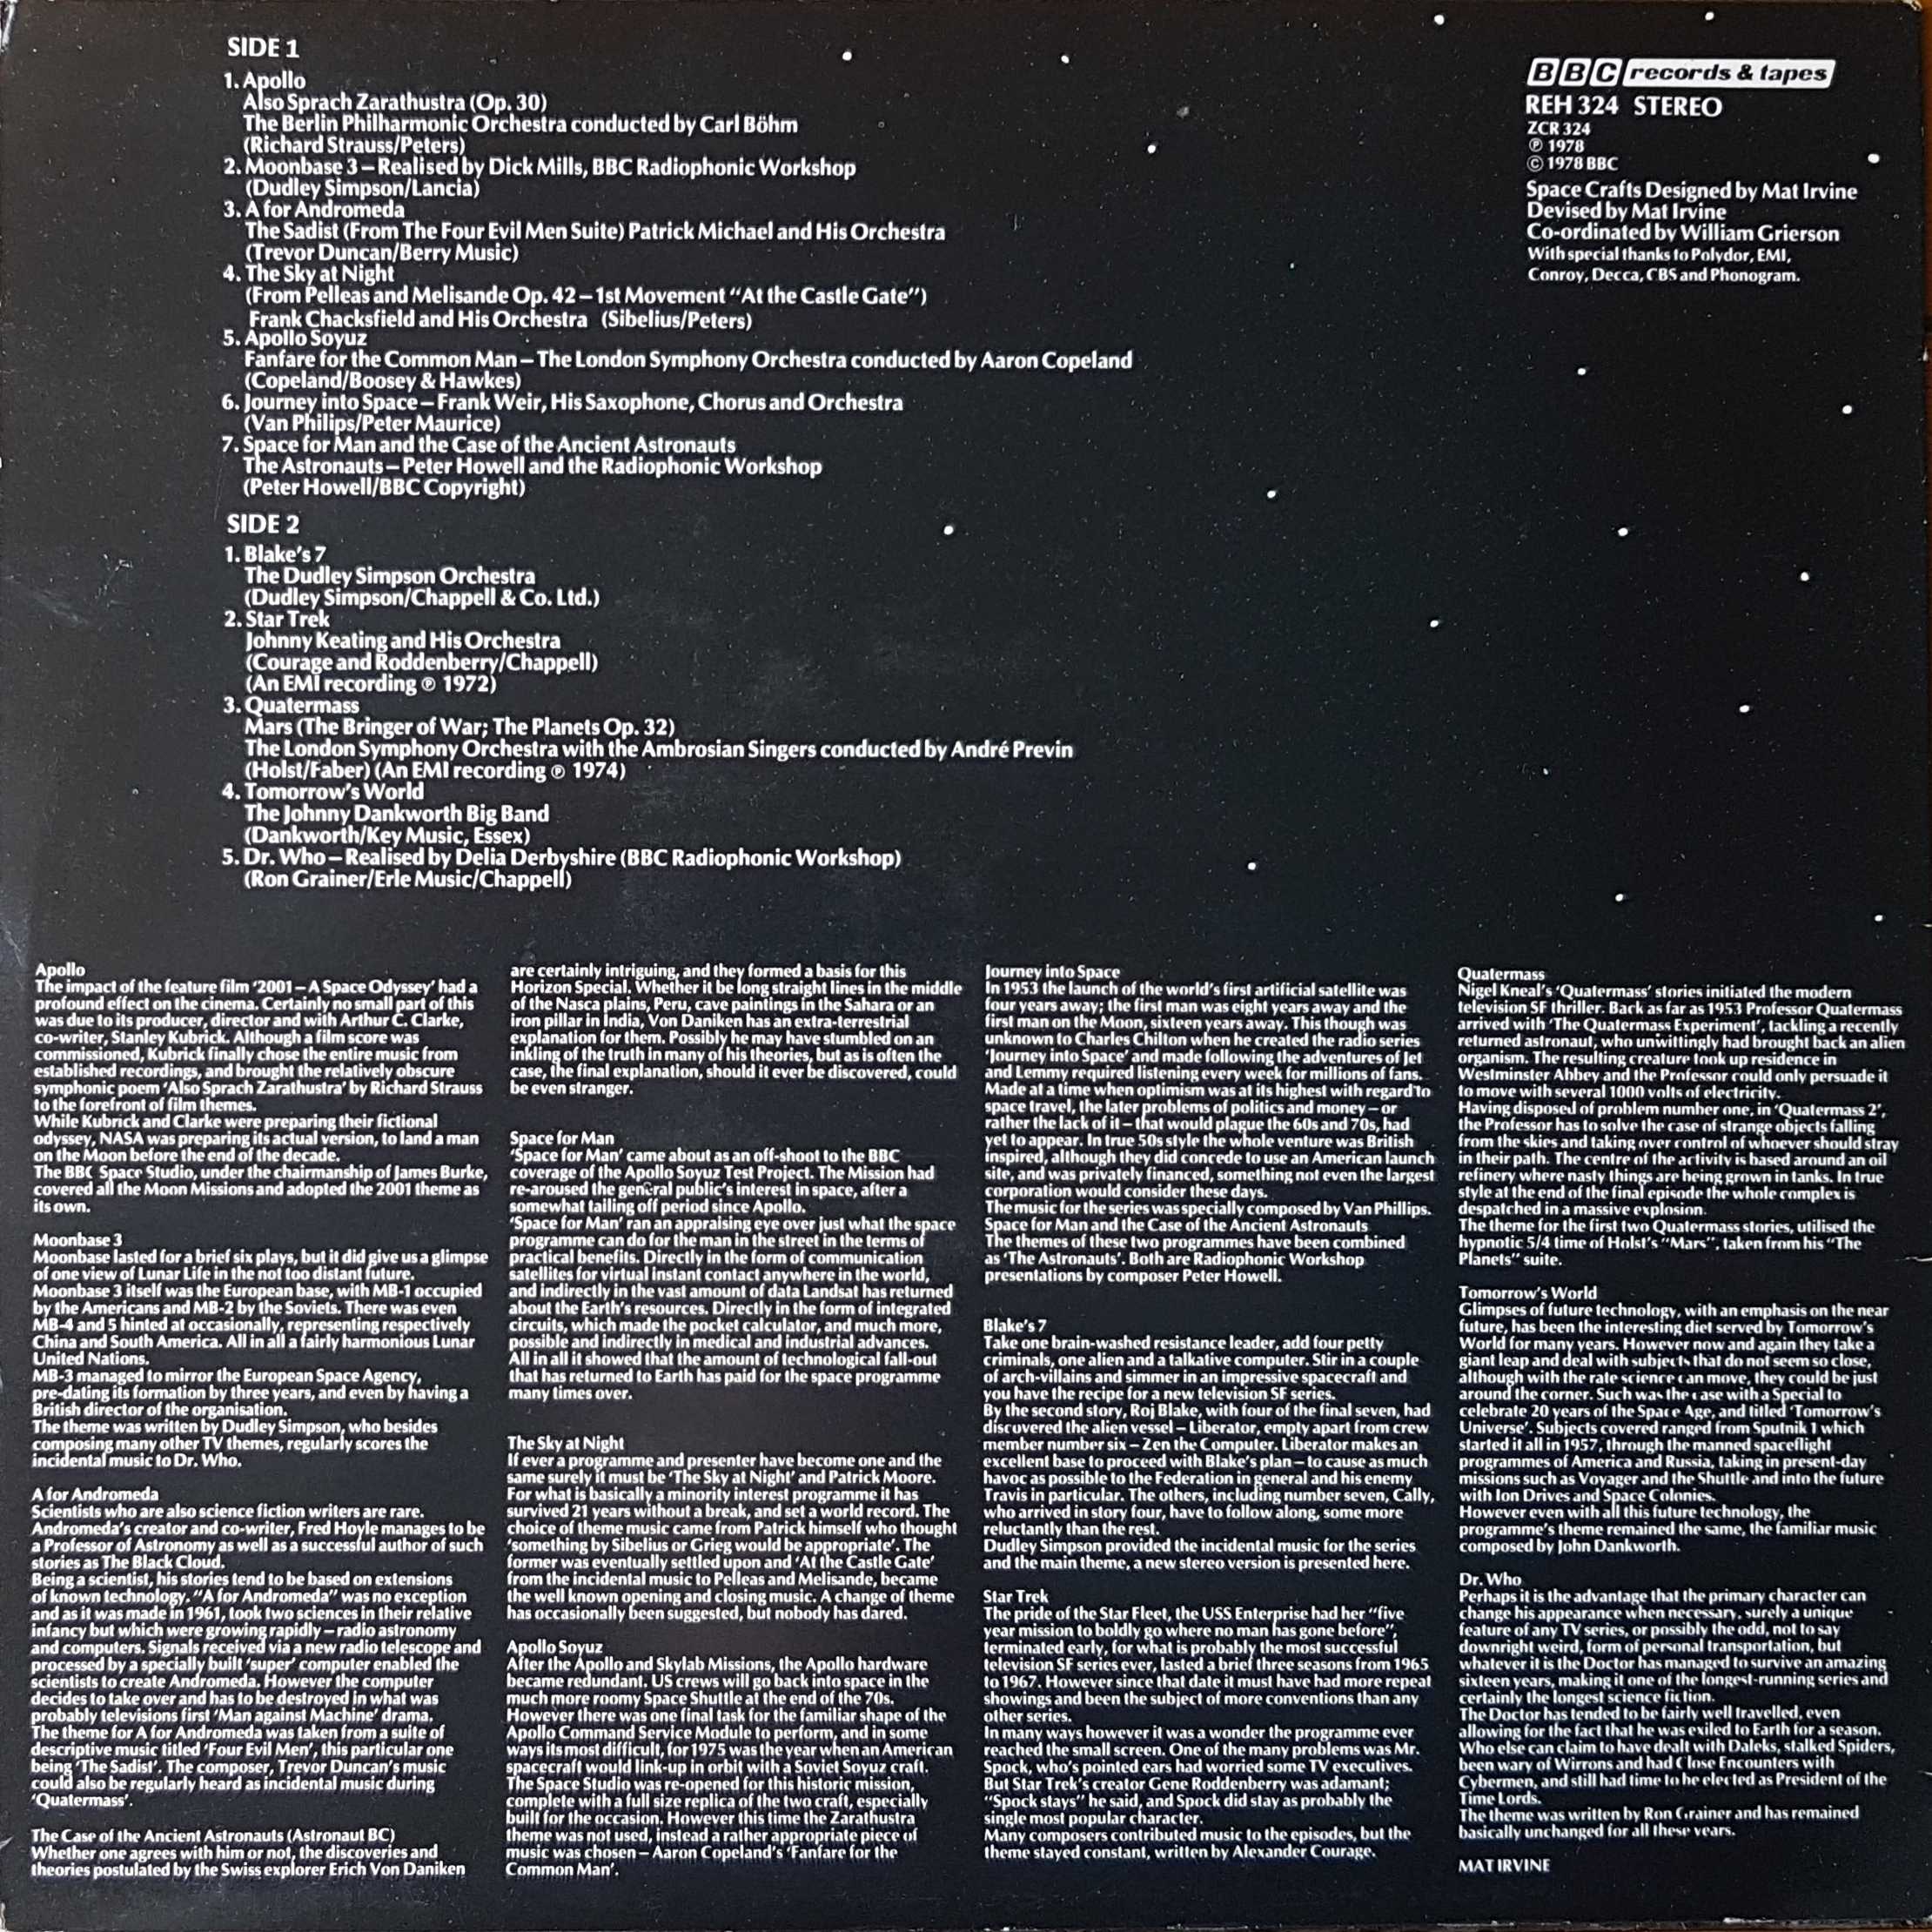 Picture of REH 324 BBC space themes by artist Various from the BBC records and Tapes library